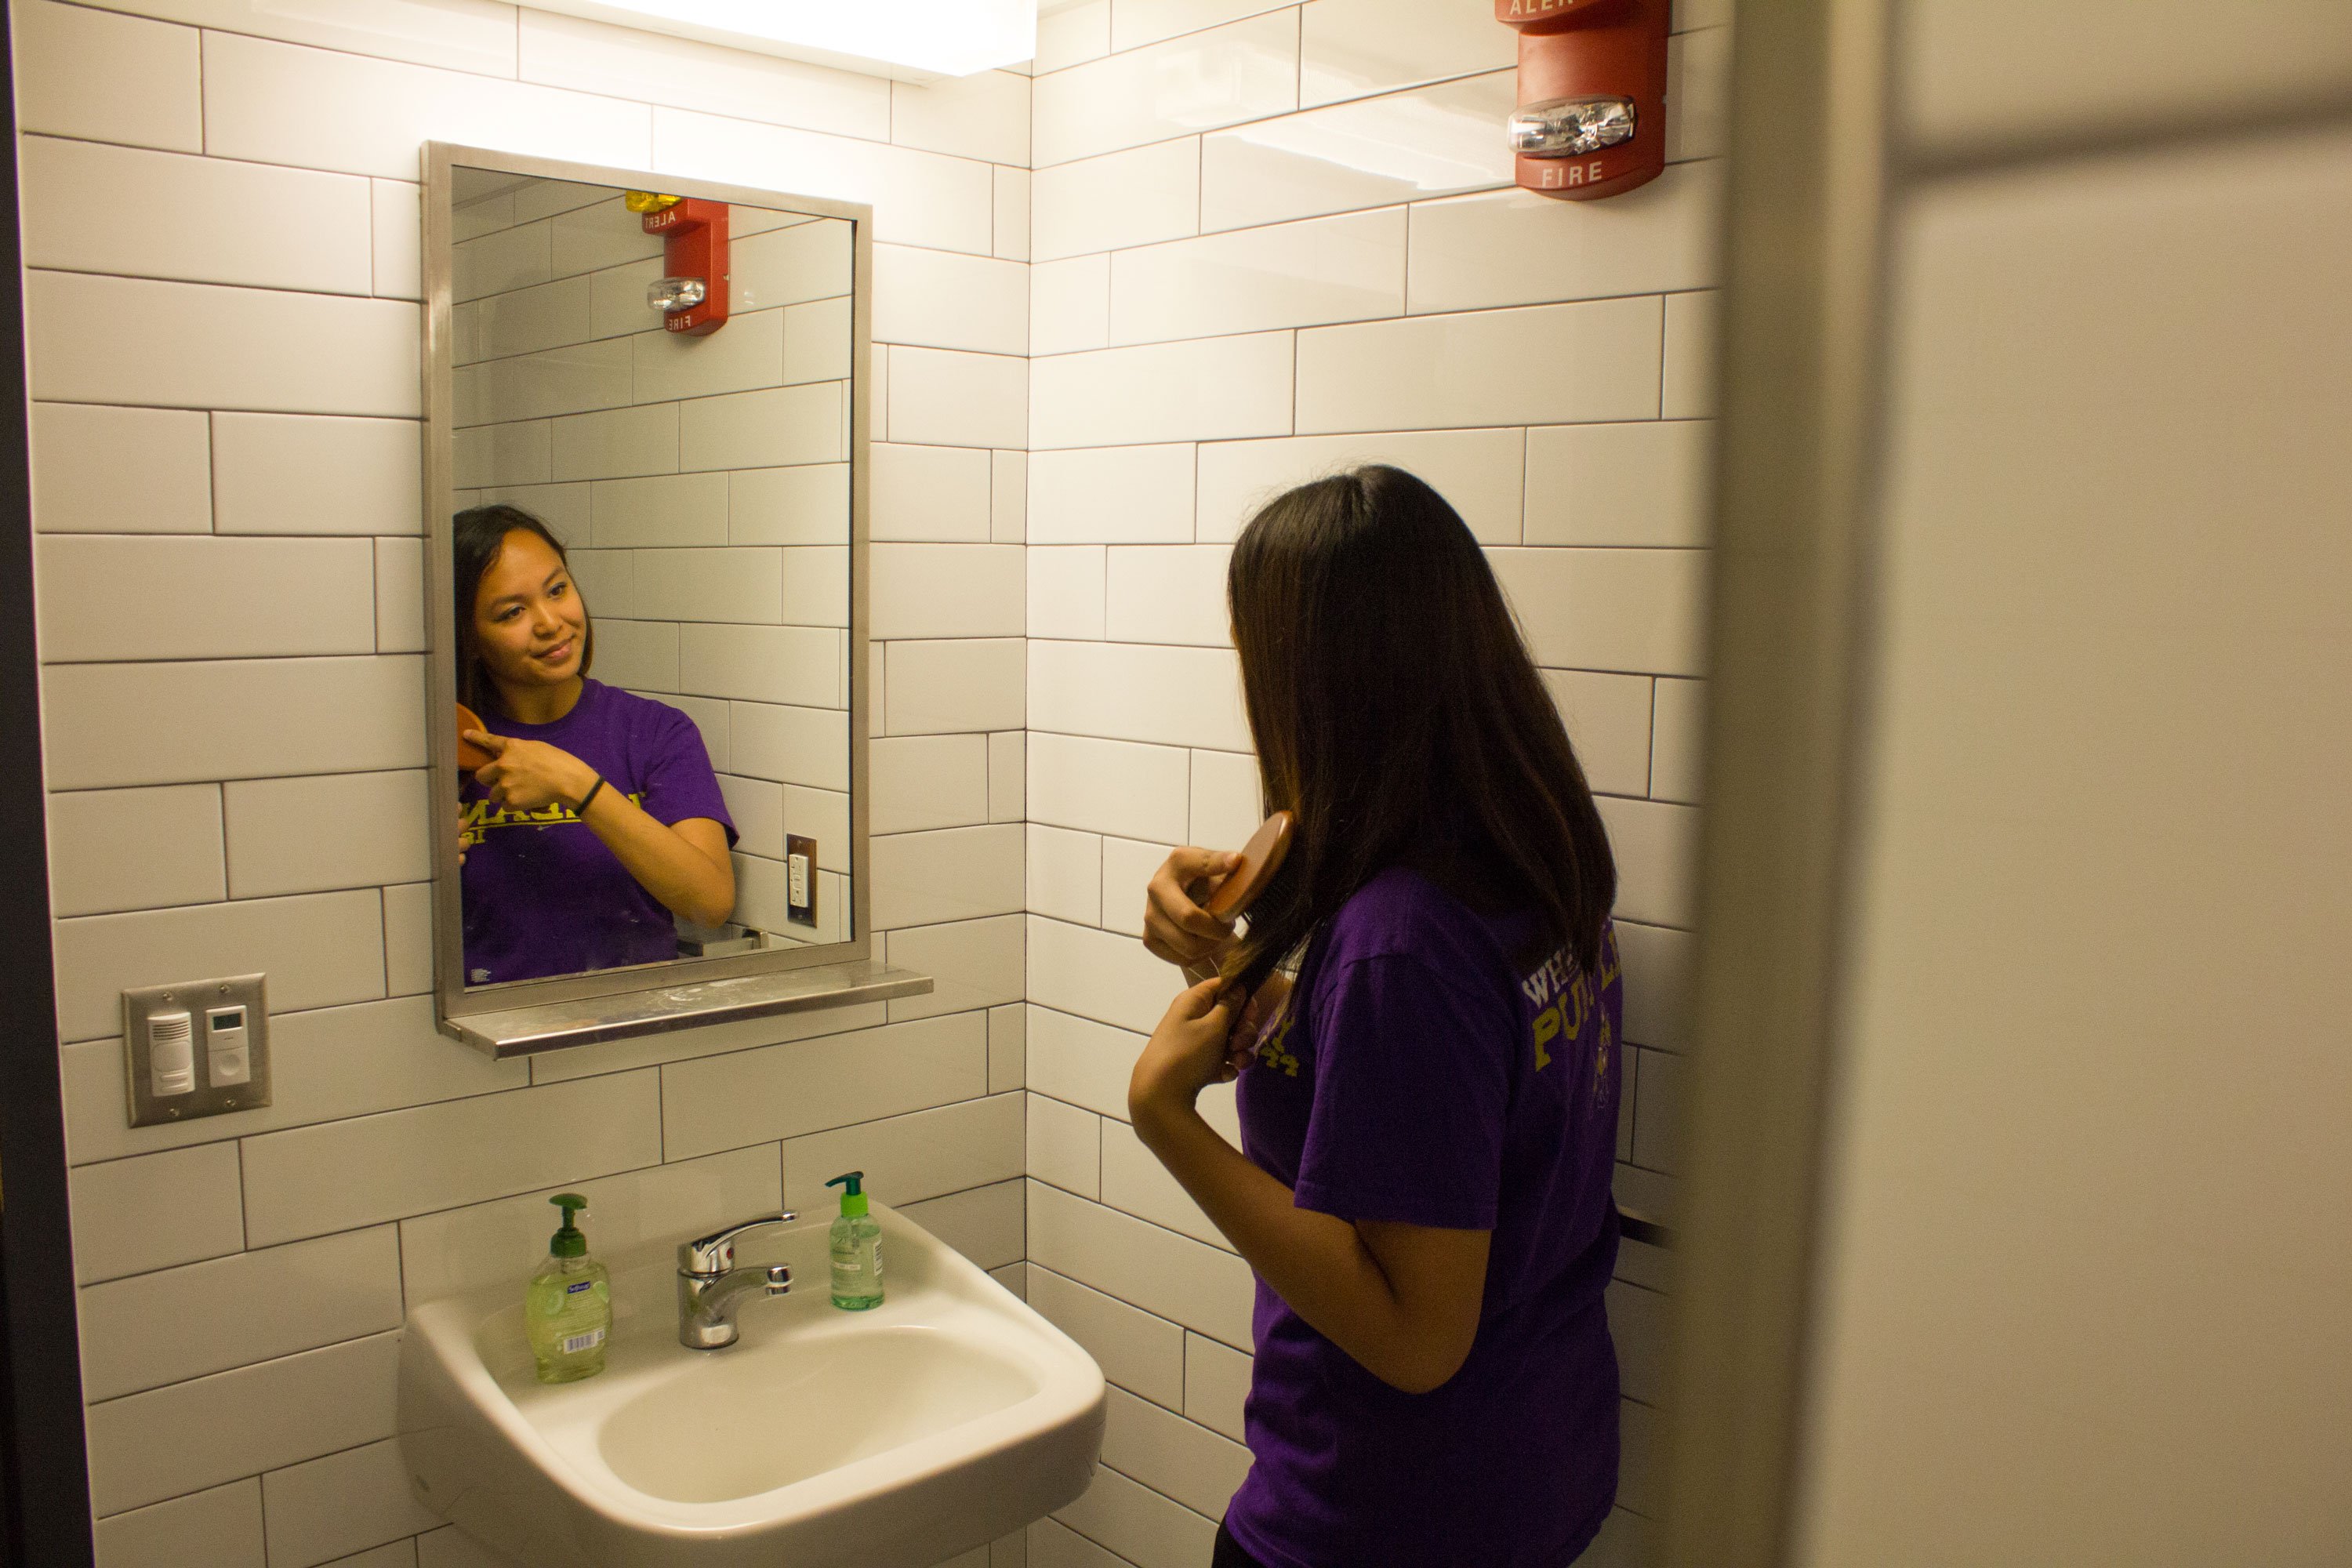 A student in a purple shirt brushes her hair in front of a bathroom sink and mirror